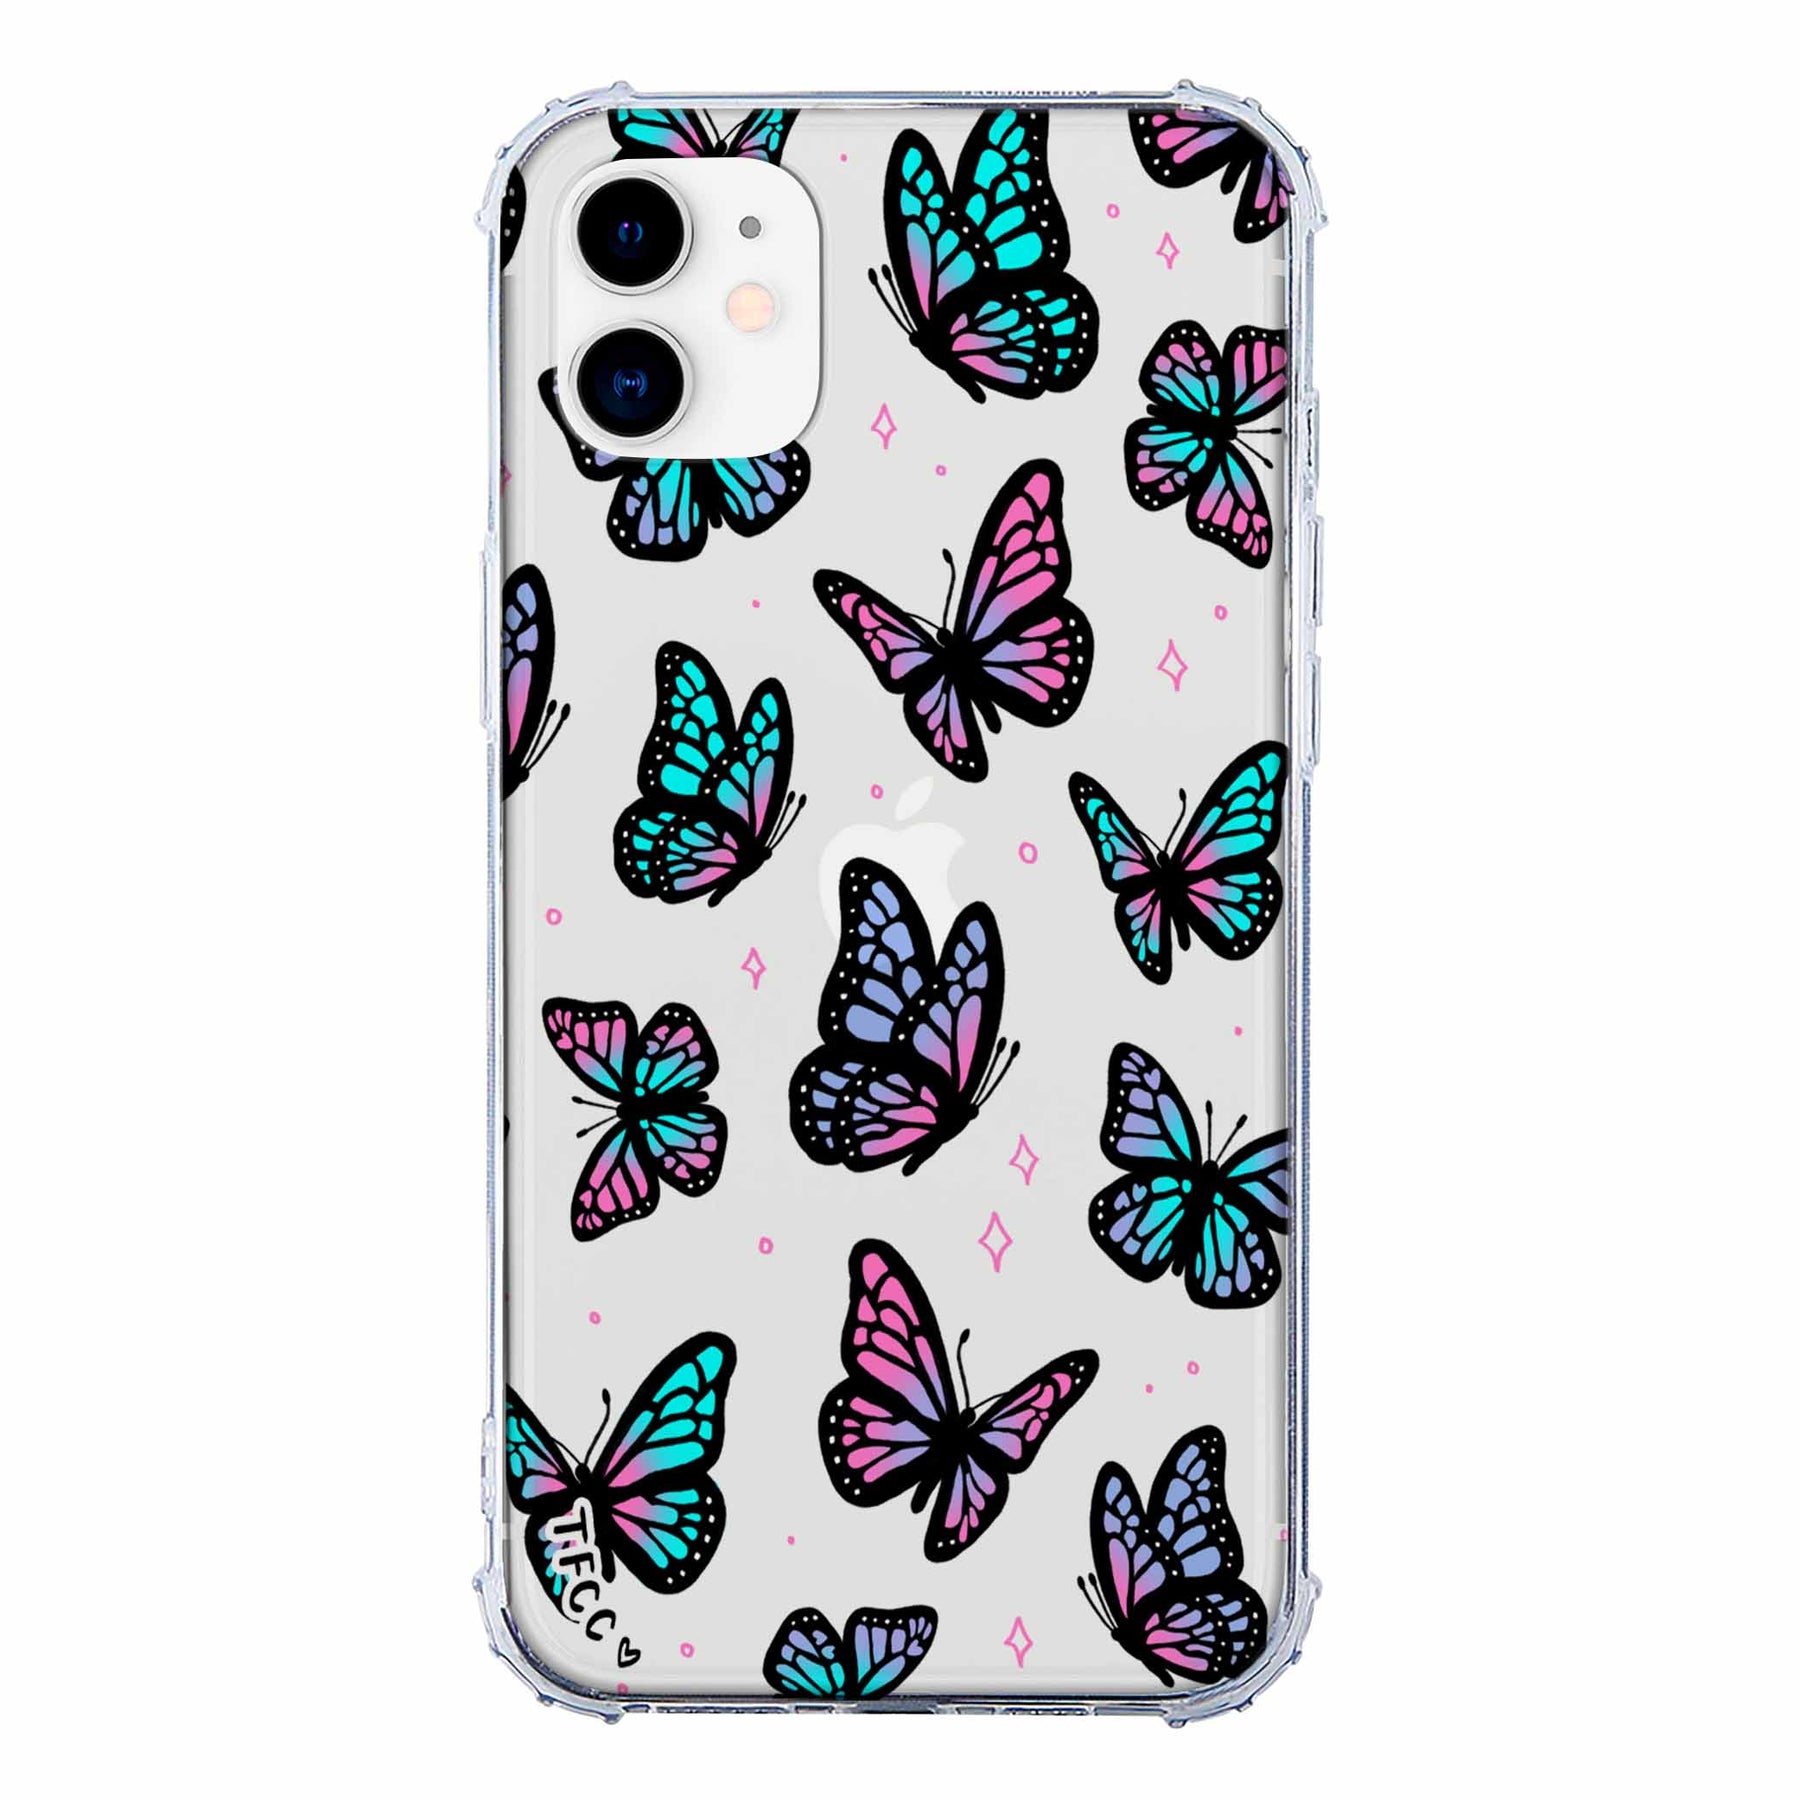 BUTTERFLY CLEAR CASE - thefonecasecompany